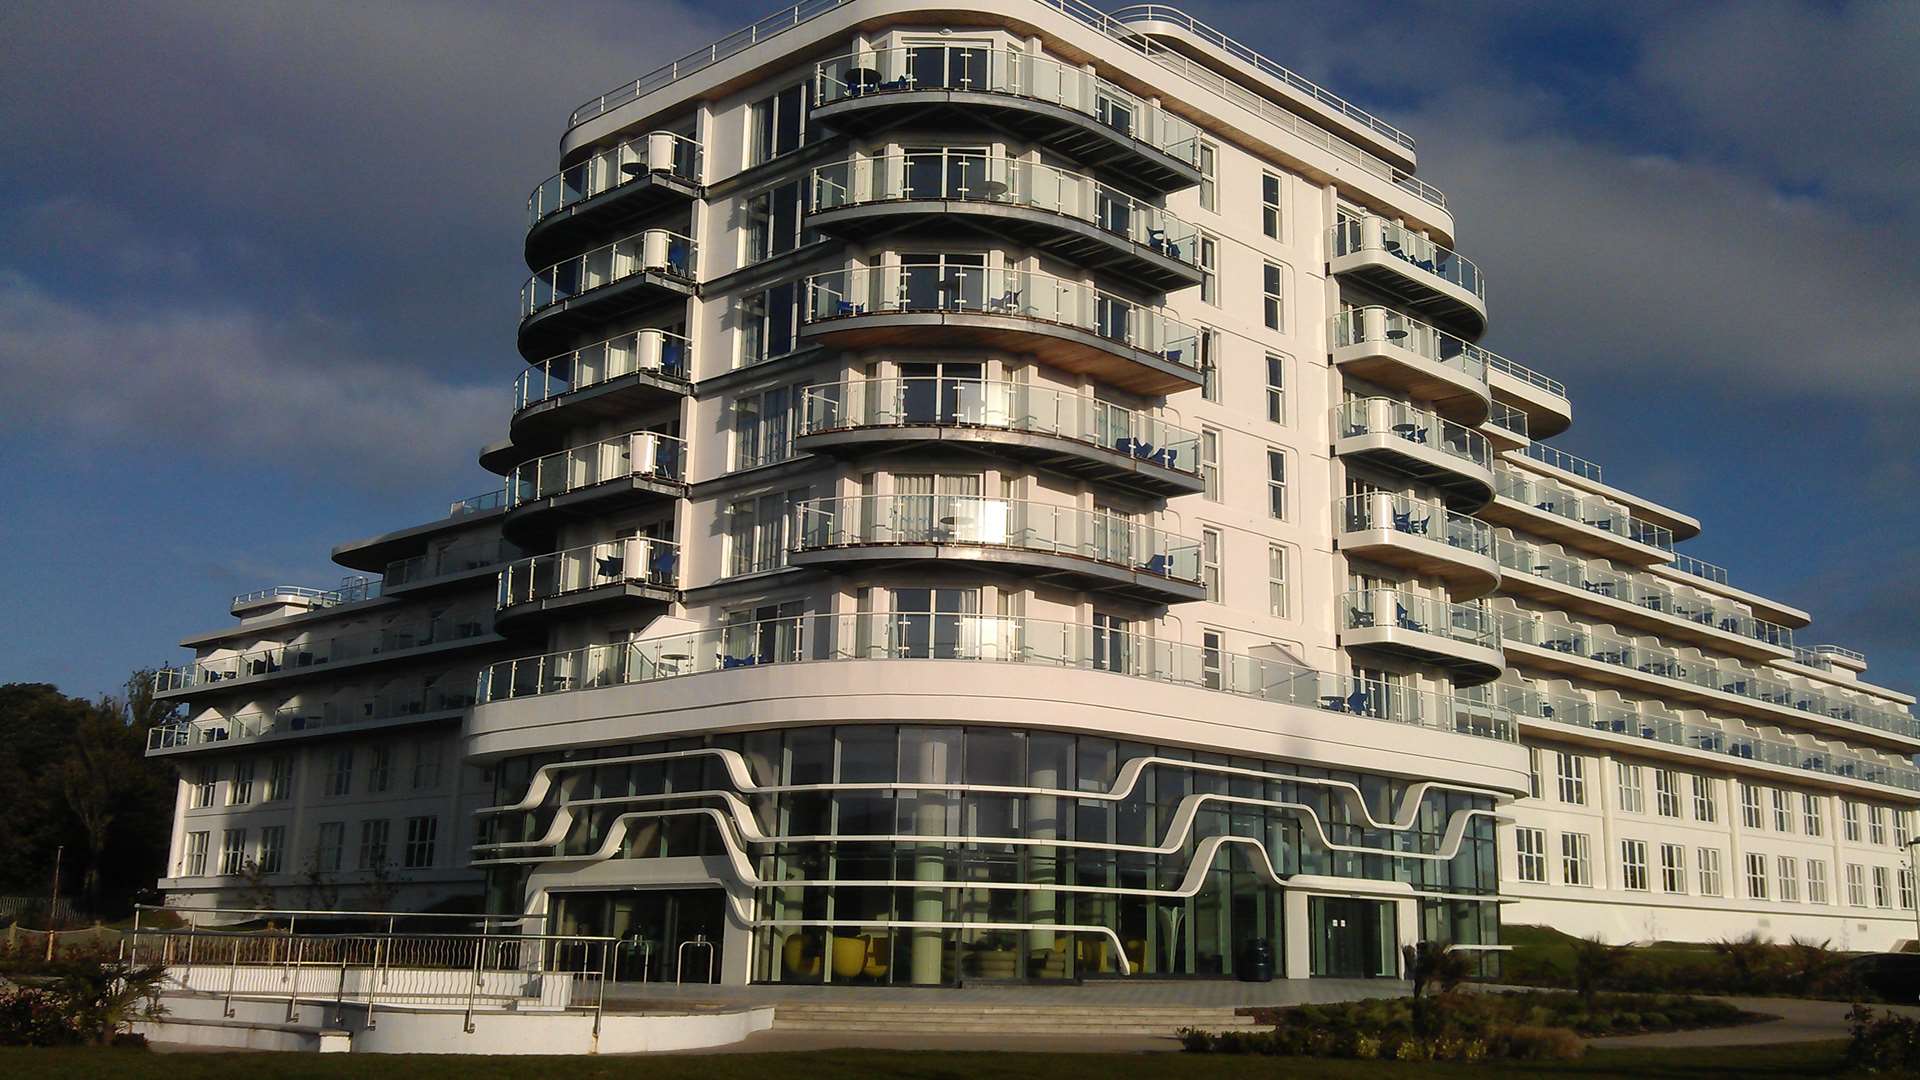 The wave hotel in Butlin's